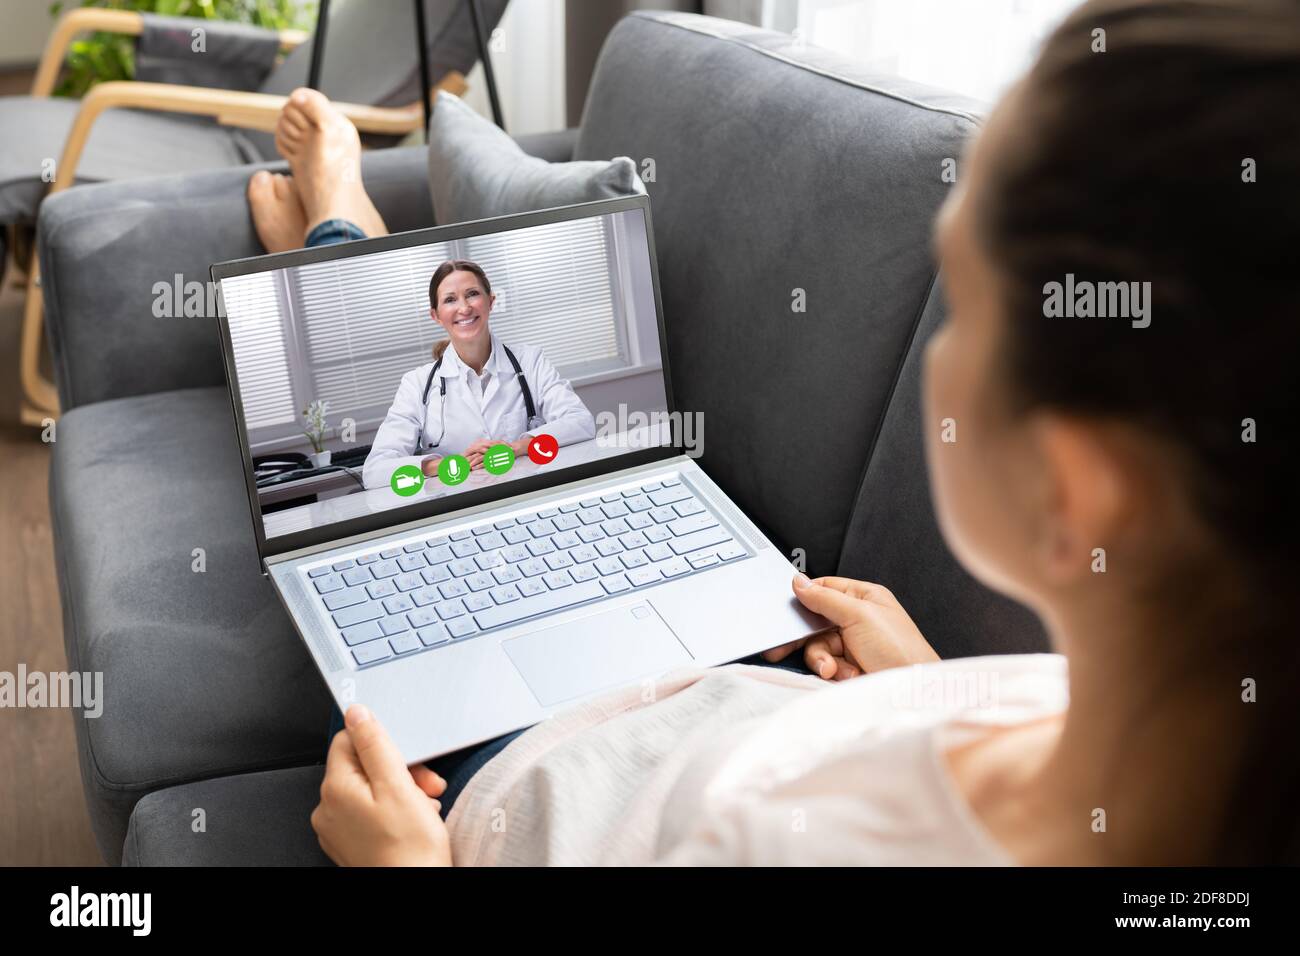 Online Medical Video Conference With Doctor On Laptop Stock Photo